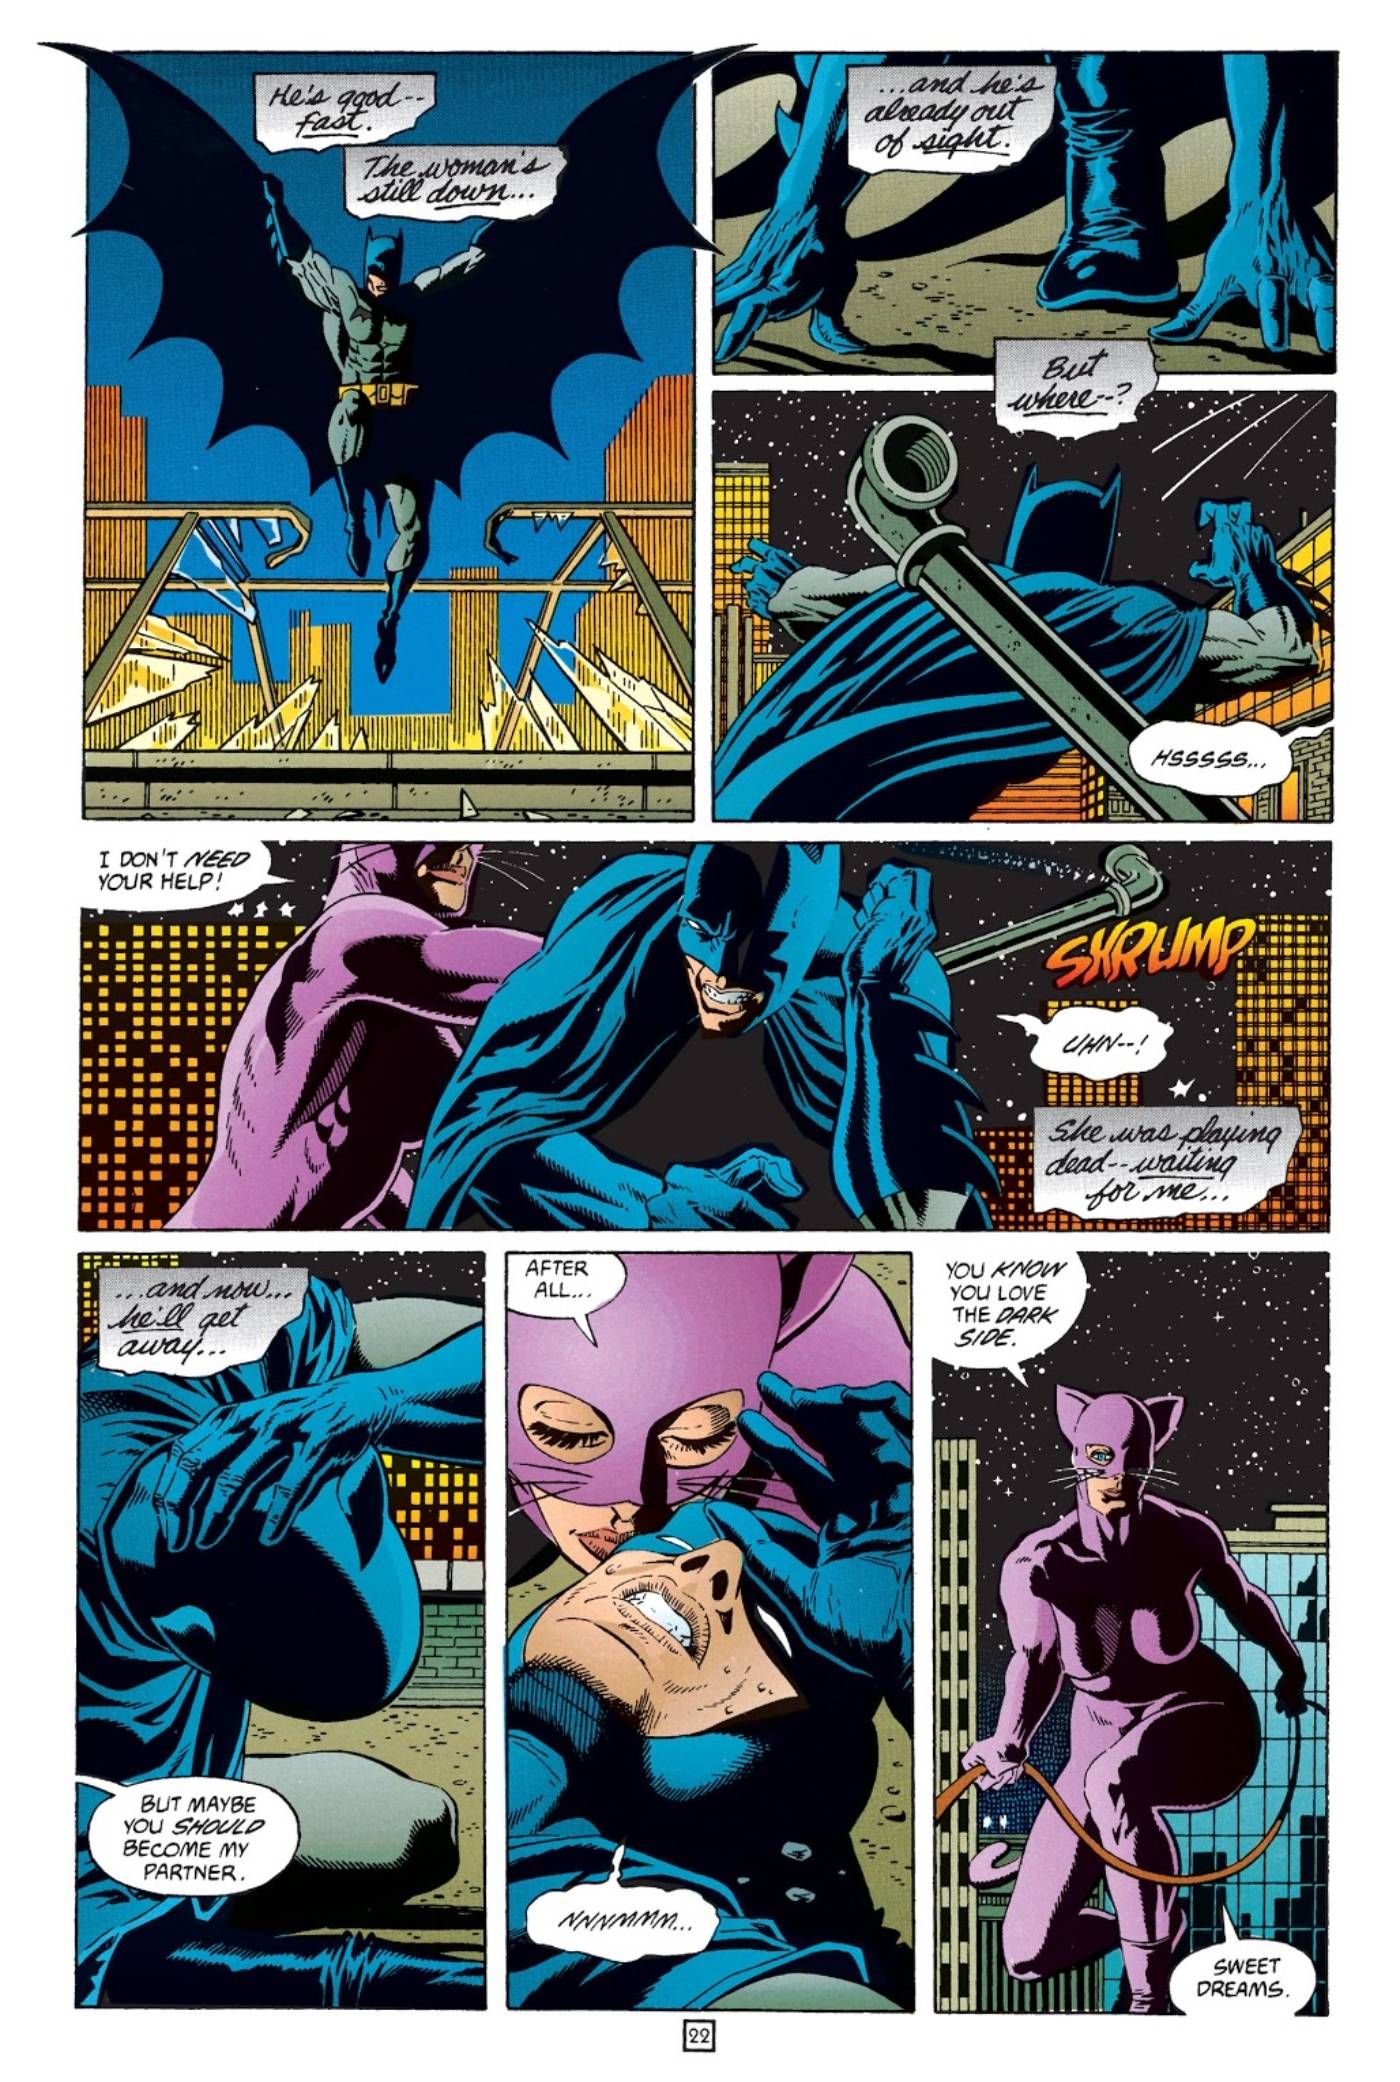 Batman and Catwoman fight